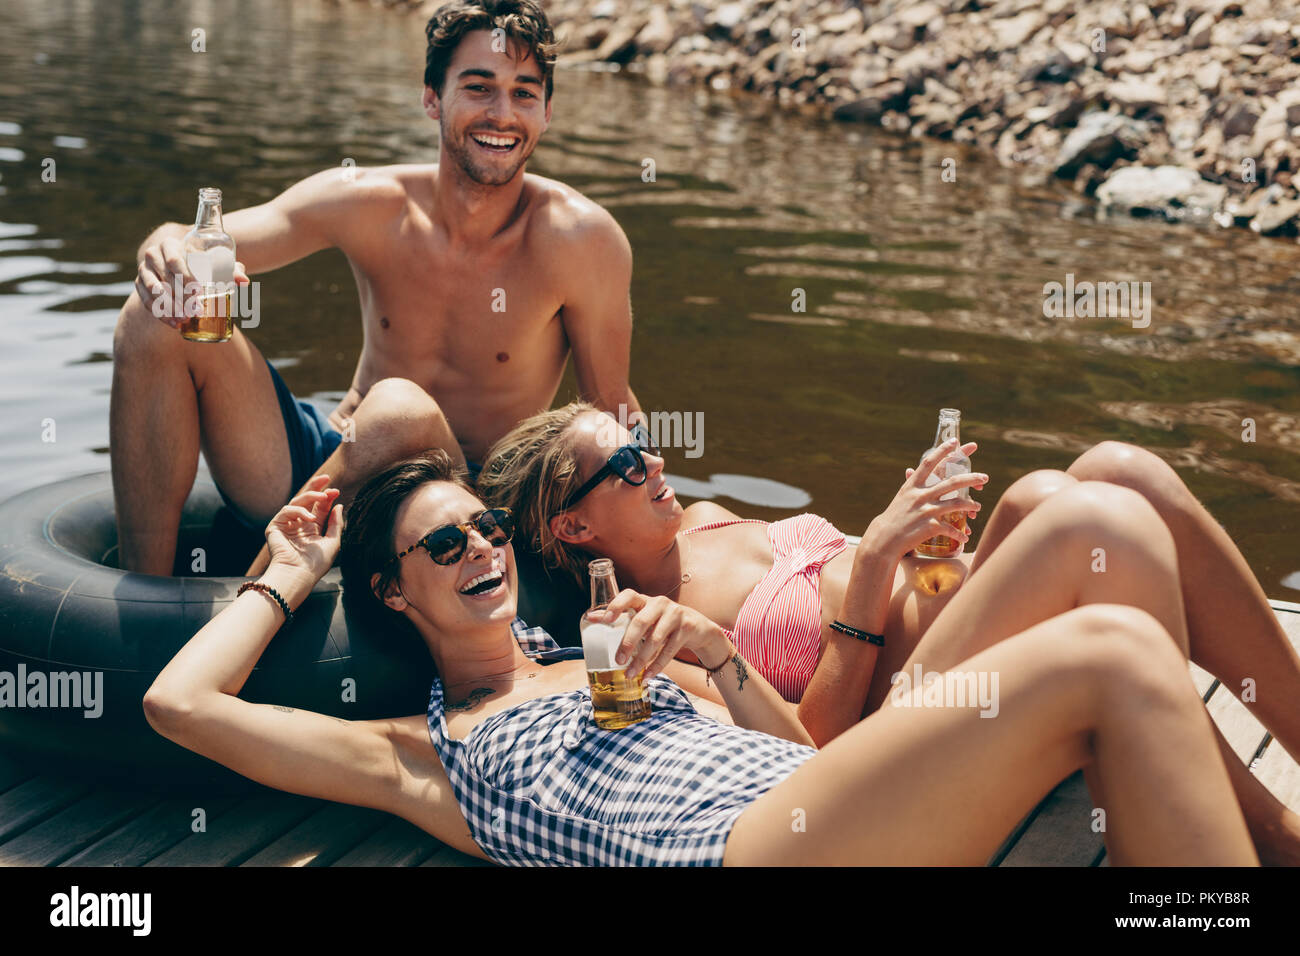 Man with two woman friends sitting on a floating dock in a lake drinking beer. Friends having fun at a lake relaxing with drinks in hand. Stock Photo